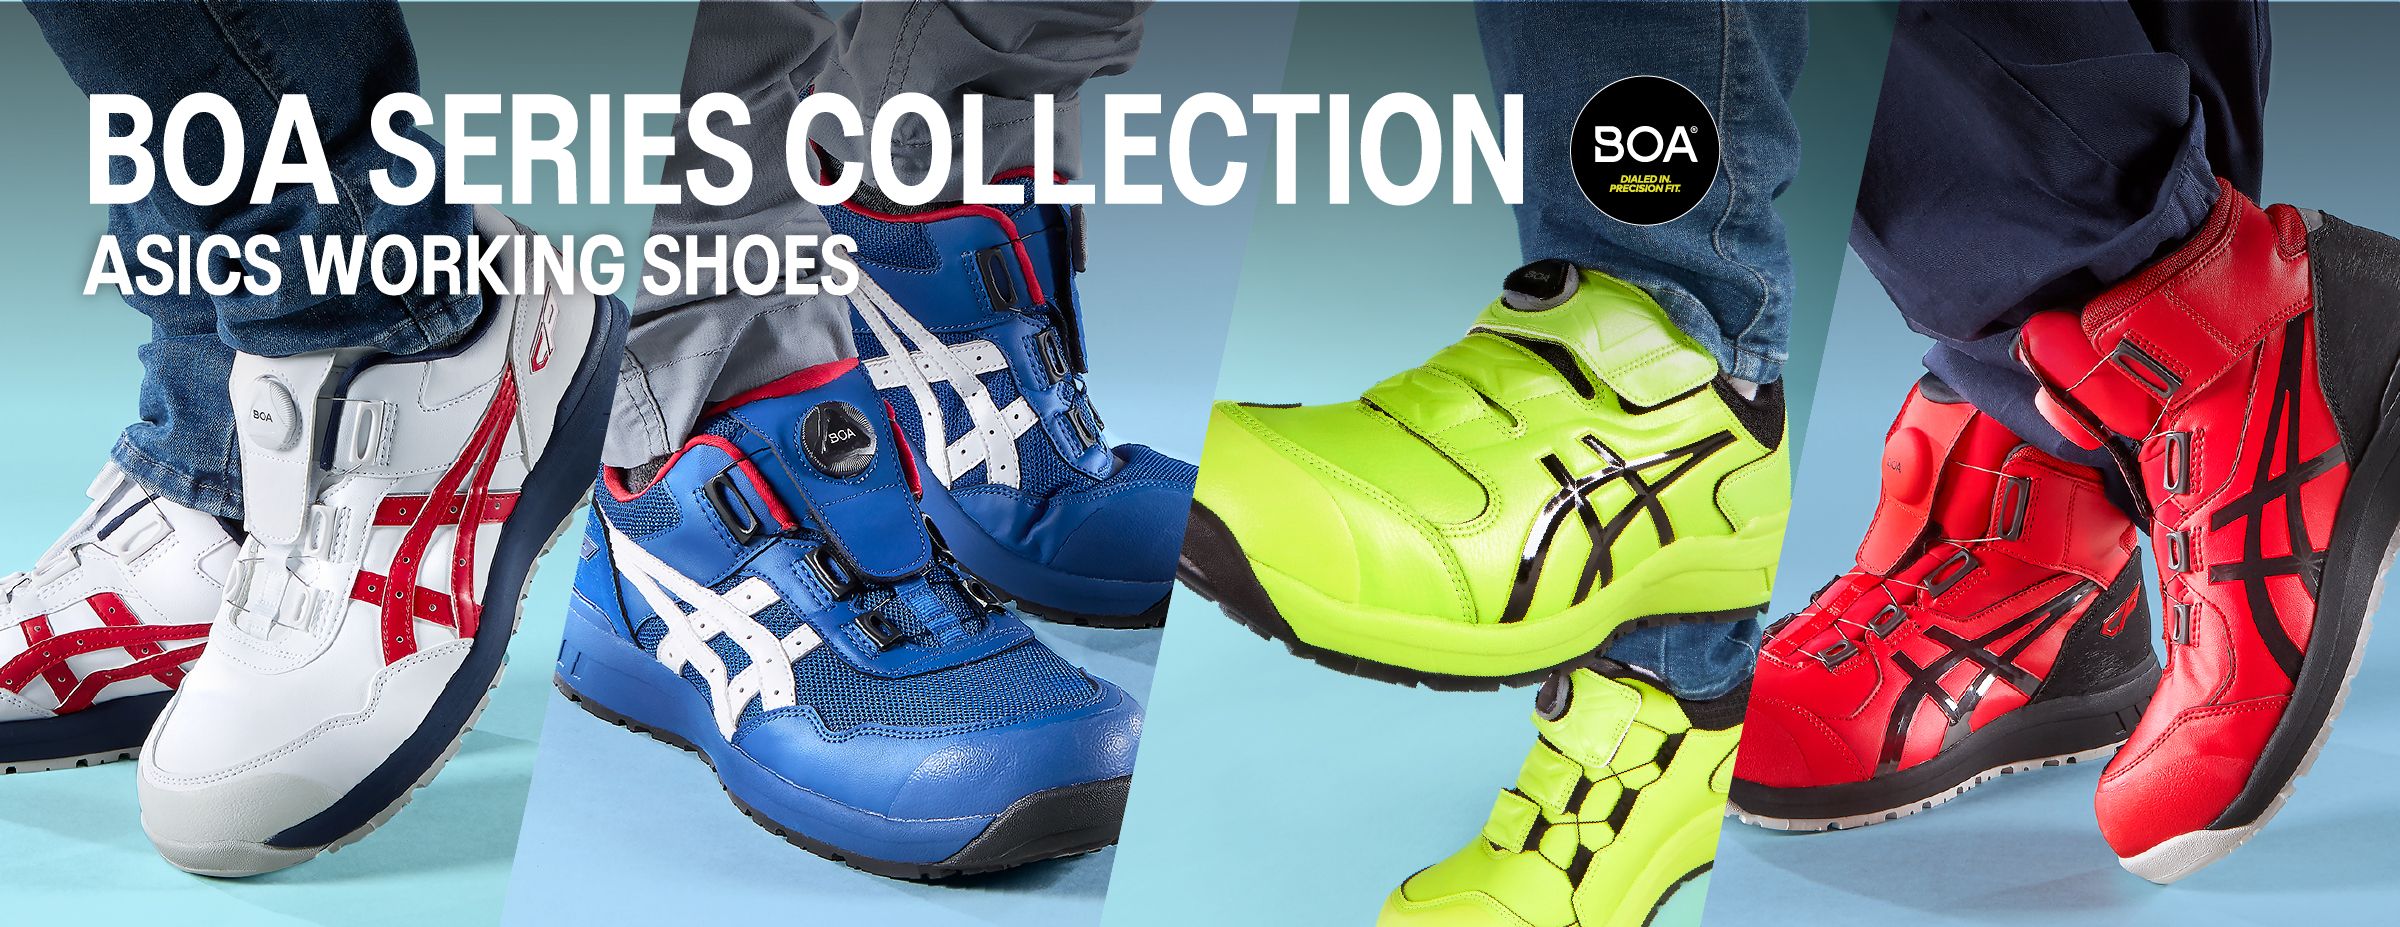 ASICS WORKING SHOES BOA SERIES COLLECTION